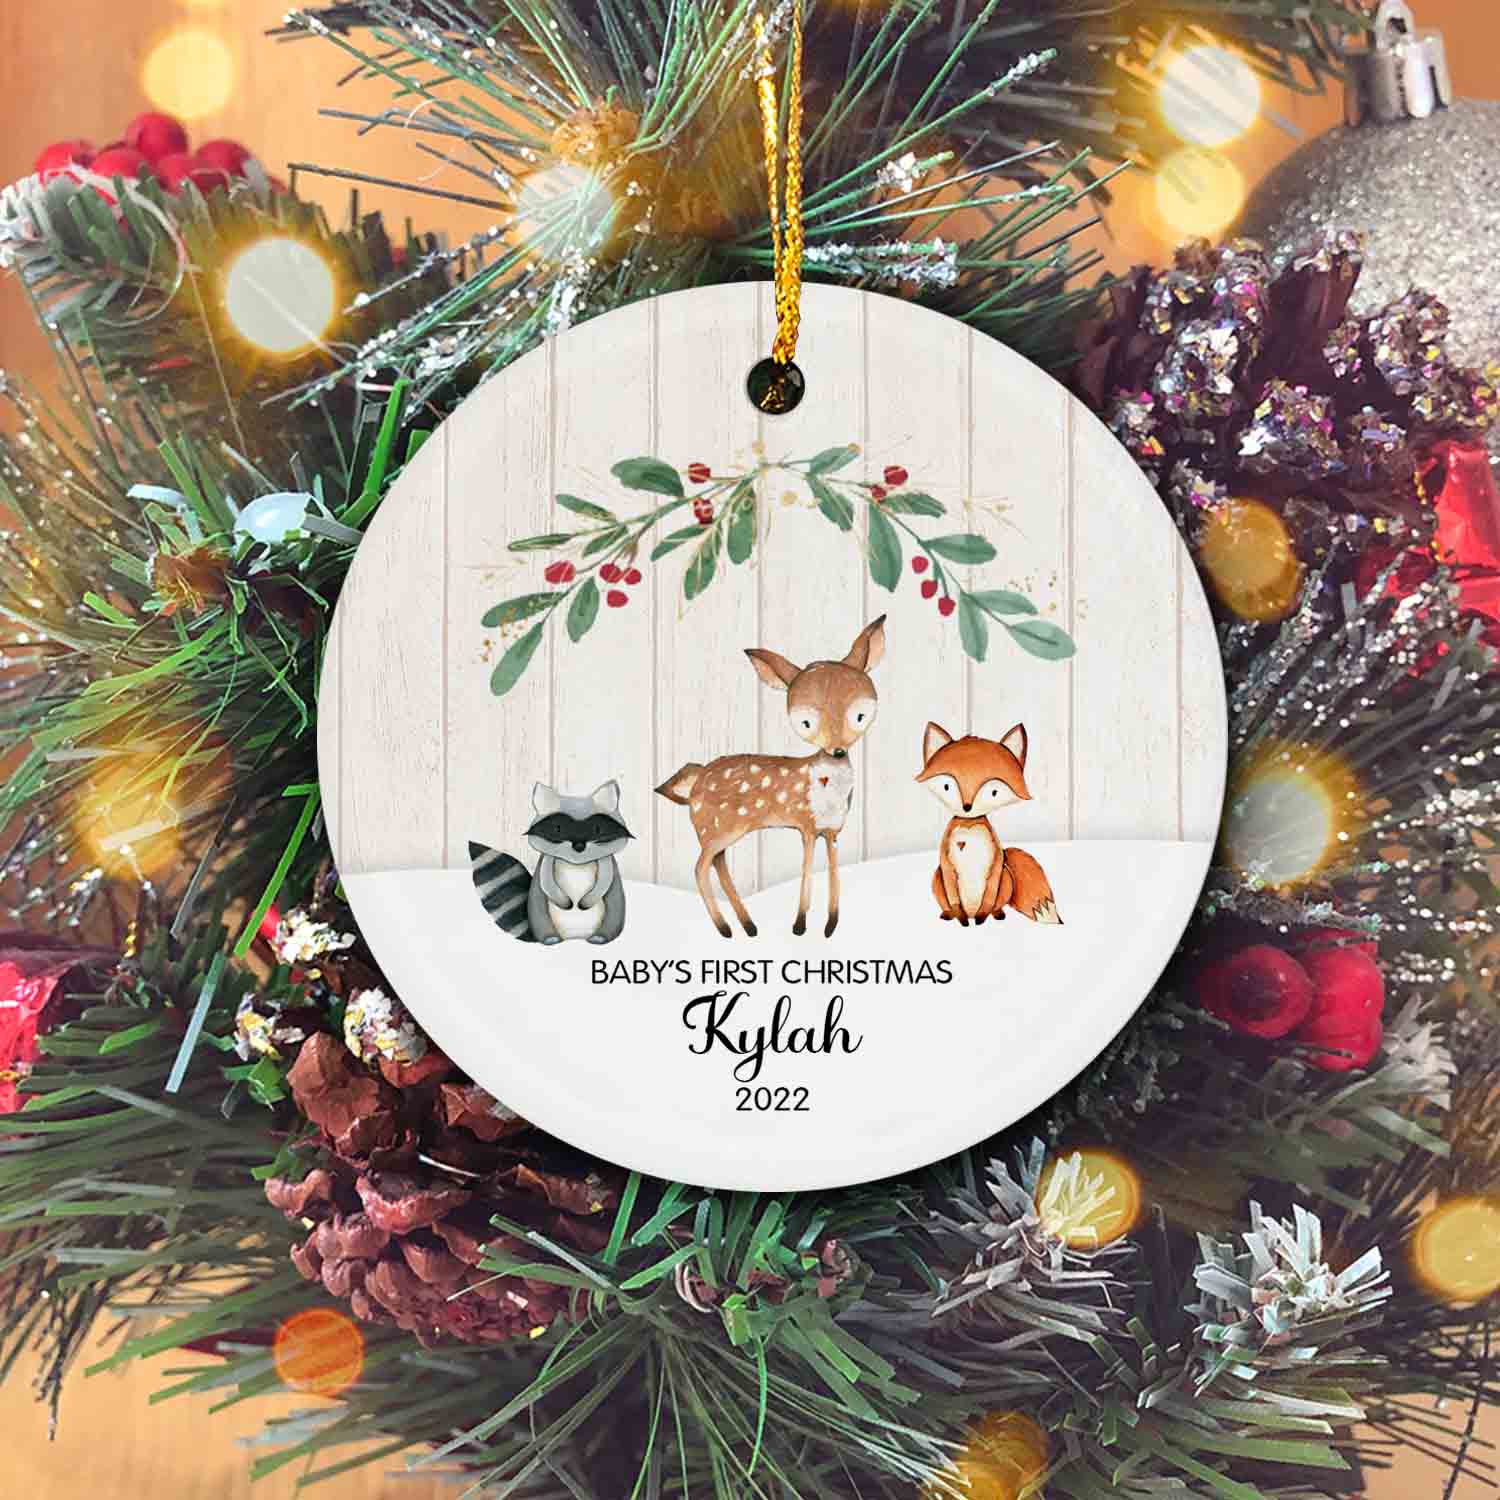 Personalized Baby's First Christmas Ornament, Baby's First Ornament, Woodland Animal Ornaments, Christmas Ornaments, Ornament Gifts